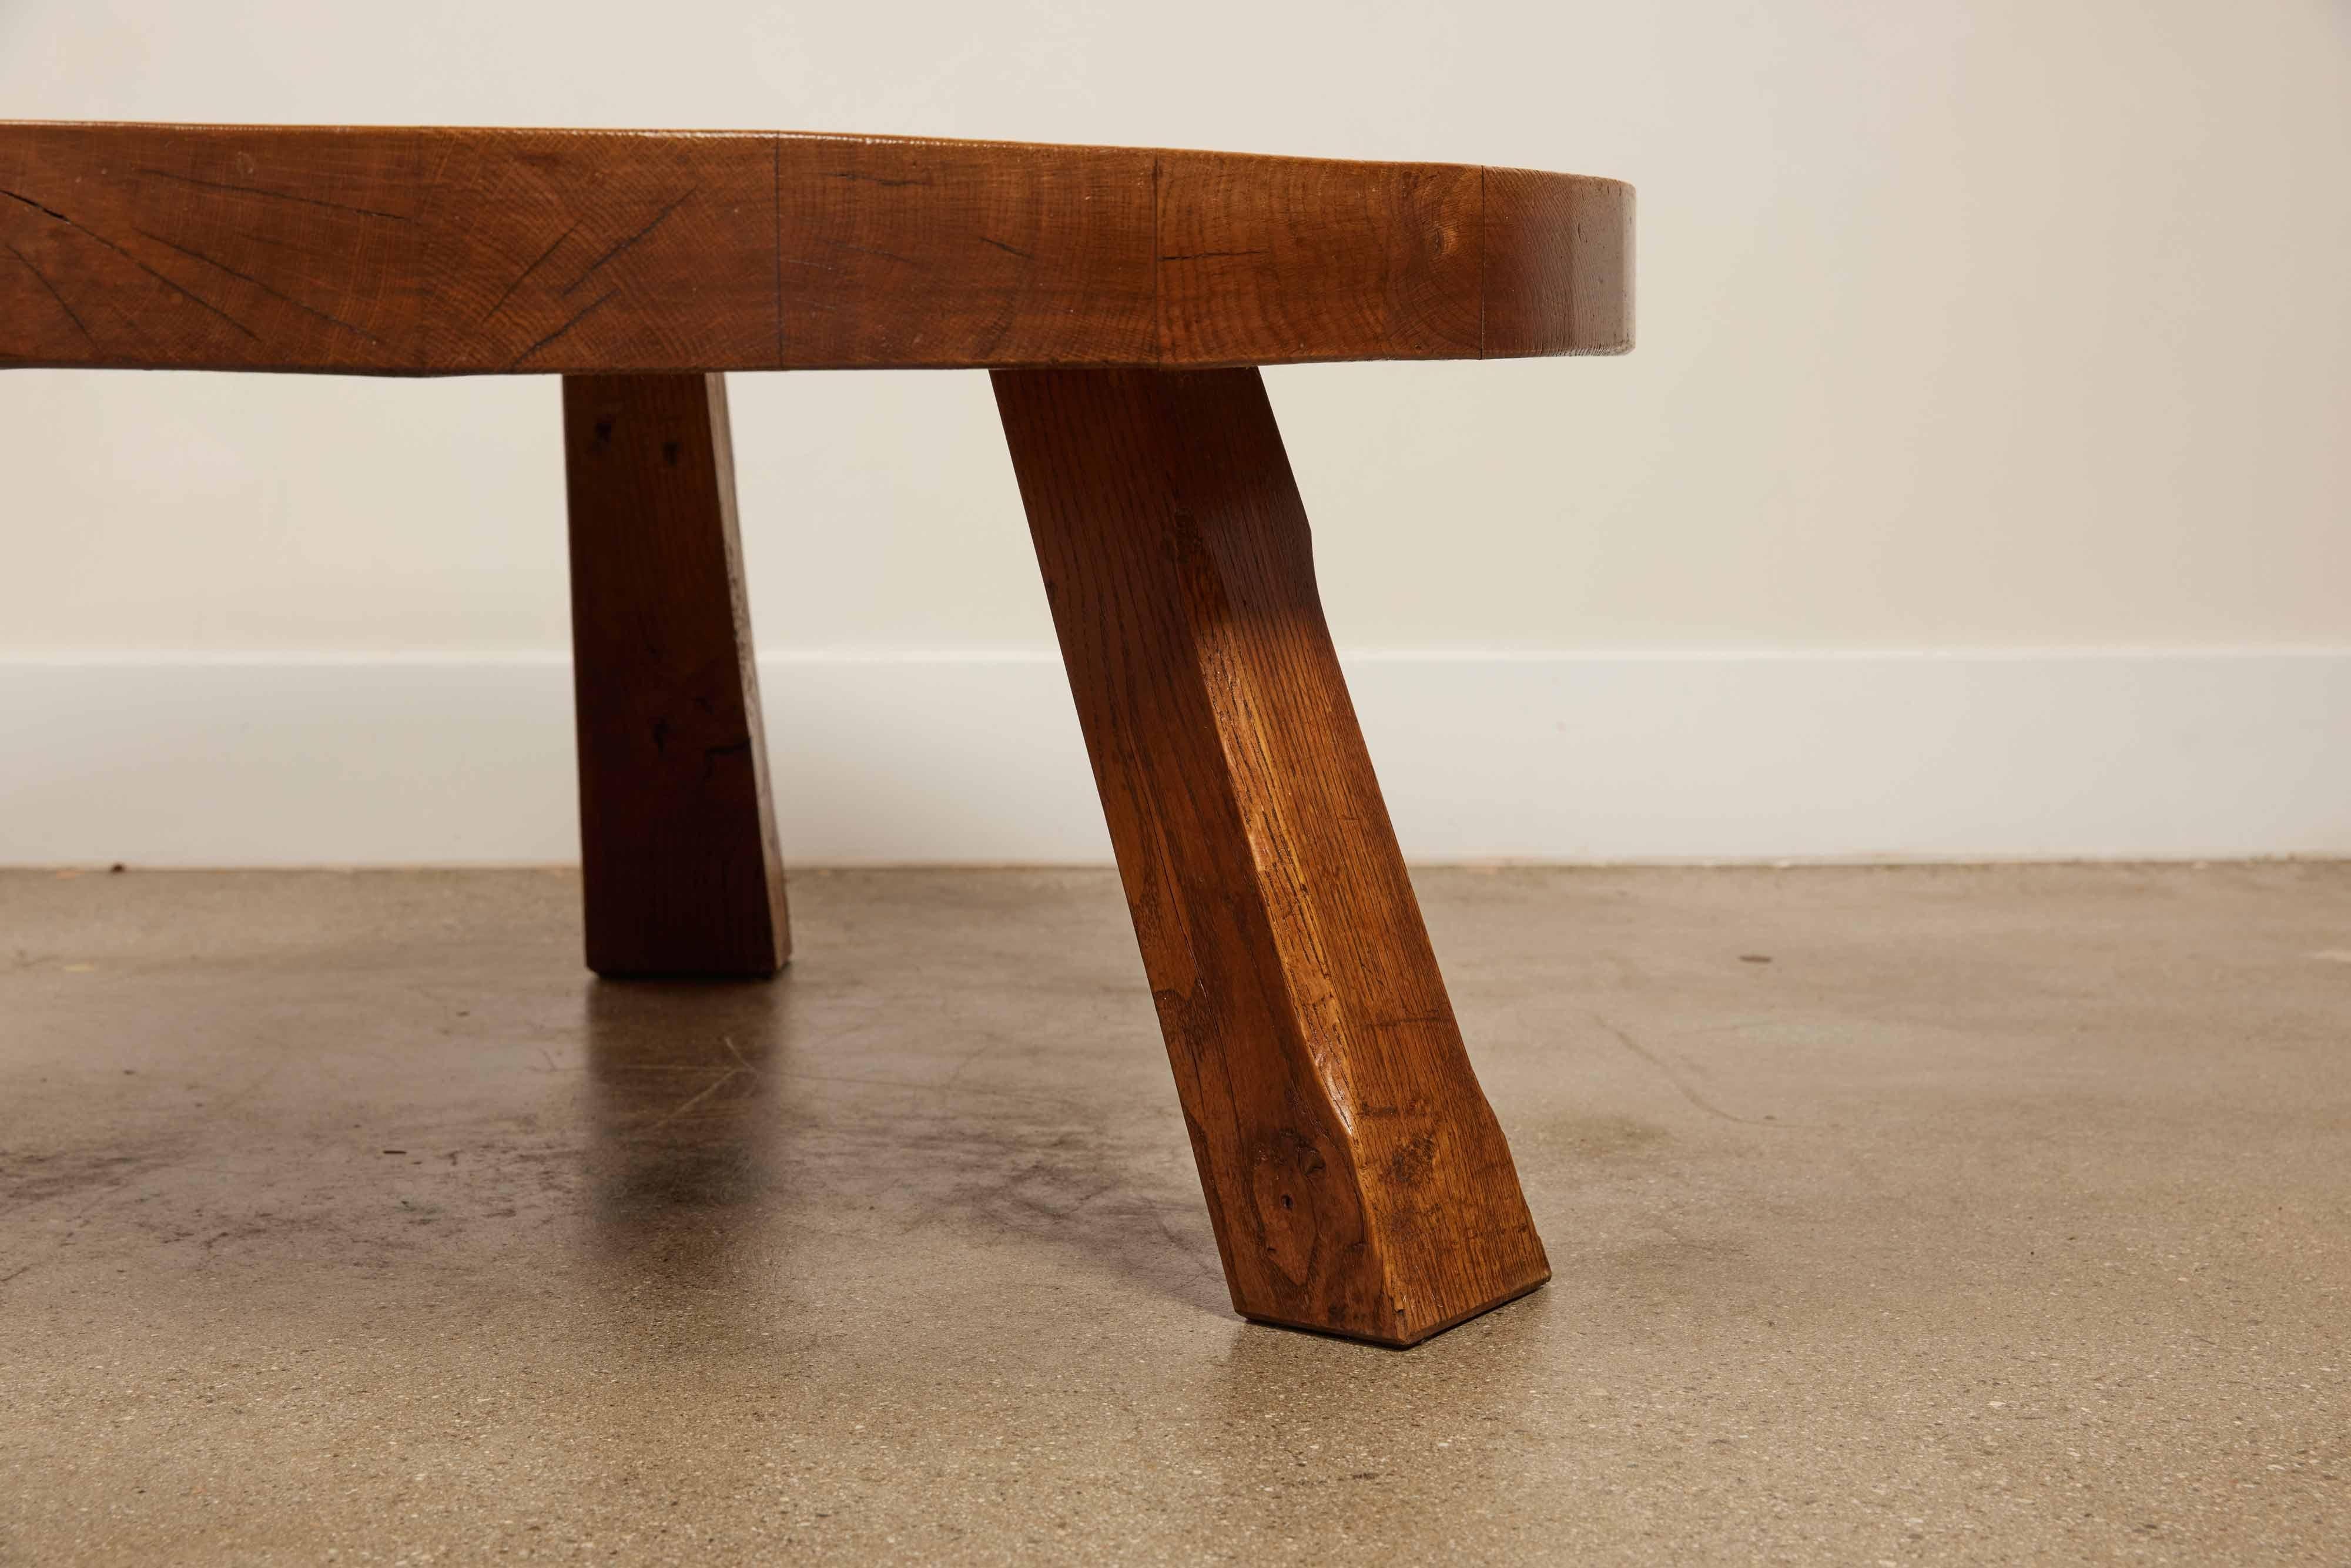 Introduce a Brutalist Solid Oak Coffee Table.

 Hailing from the Danish mid-century design movement, this table encapsulates the bold, sculptural essence of Brutalism, married beautifully with the natural warmth of oak wood.

With a diameter of 35